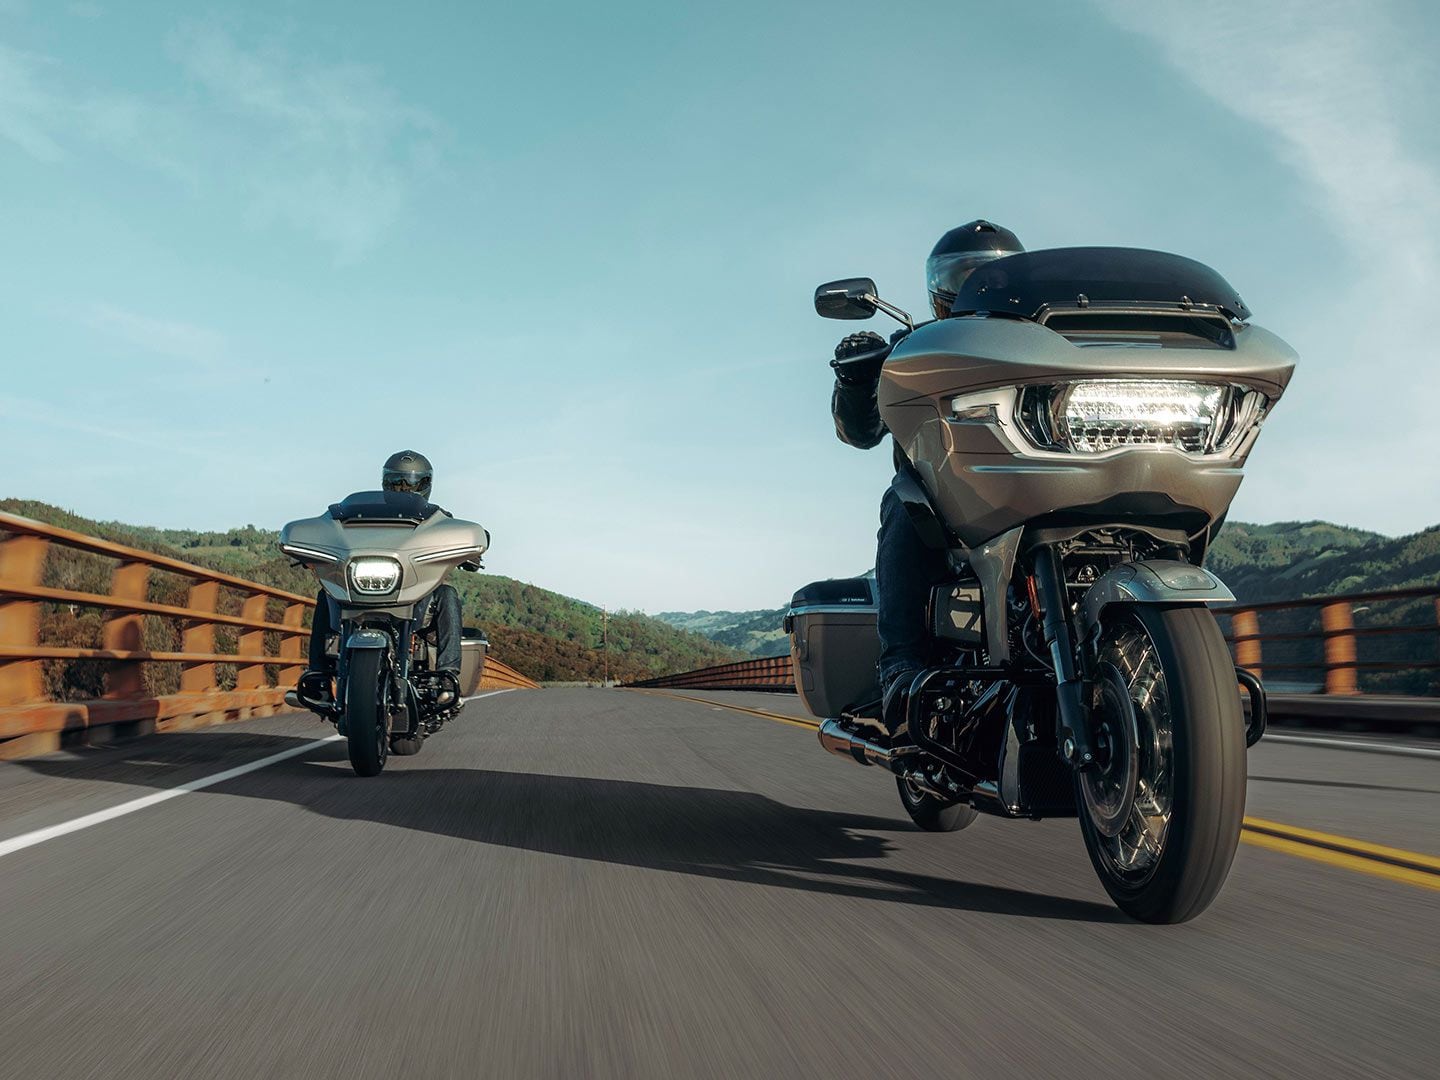 After teasing a few photos in April, Harley has officially released the 2023 CVO Street Glide and CVO Road Glide models, both featuring the Milwaukee-Eight 121 engine.